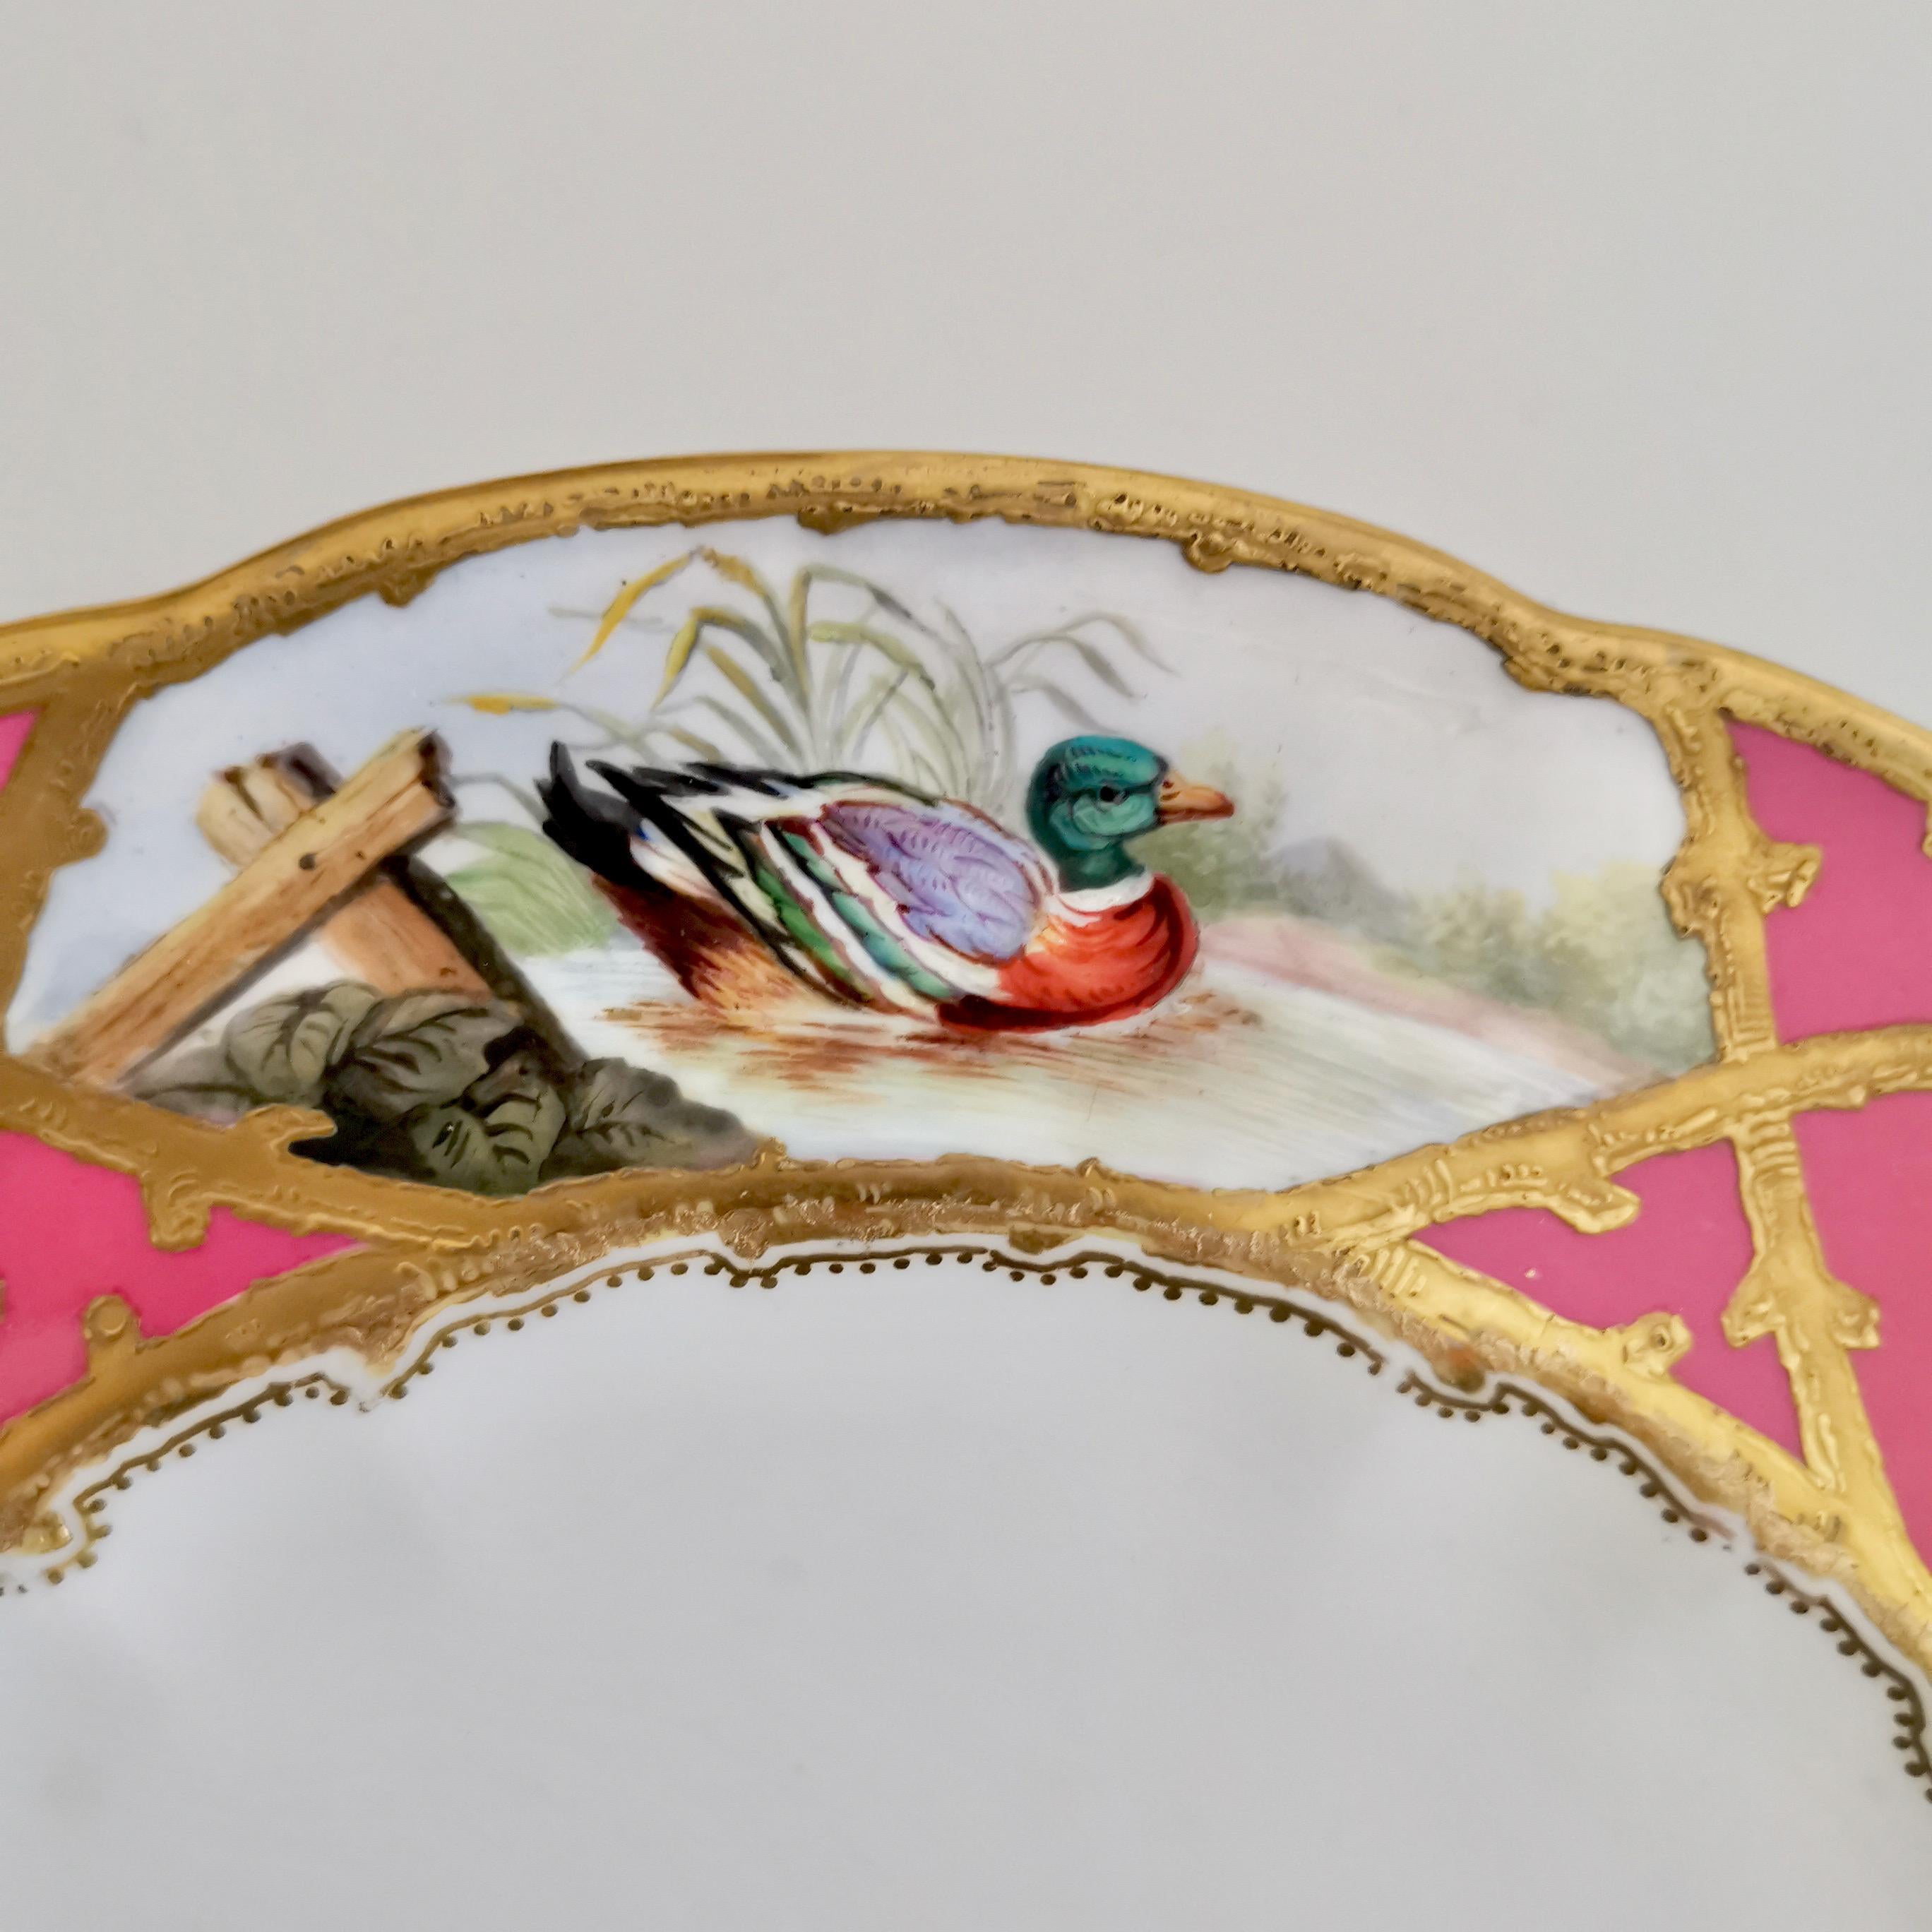 Victorian Coalport Porcelain Plate, Hot Pink with Birds and Fish, Raised Gilt, ca 1870